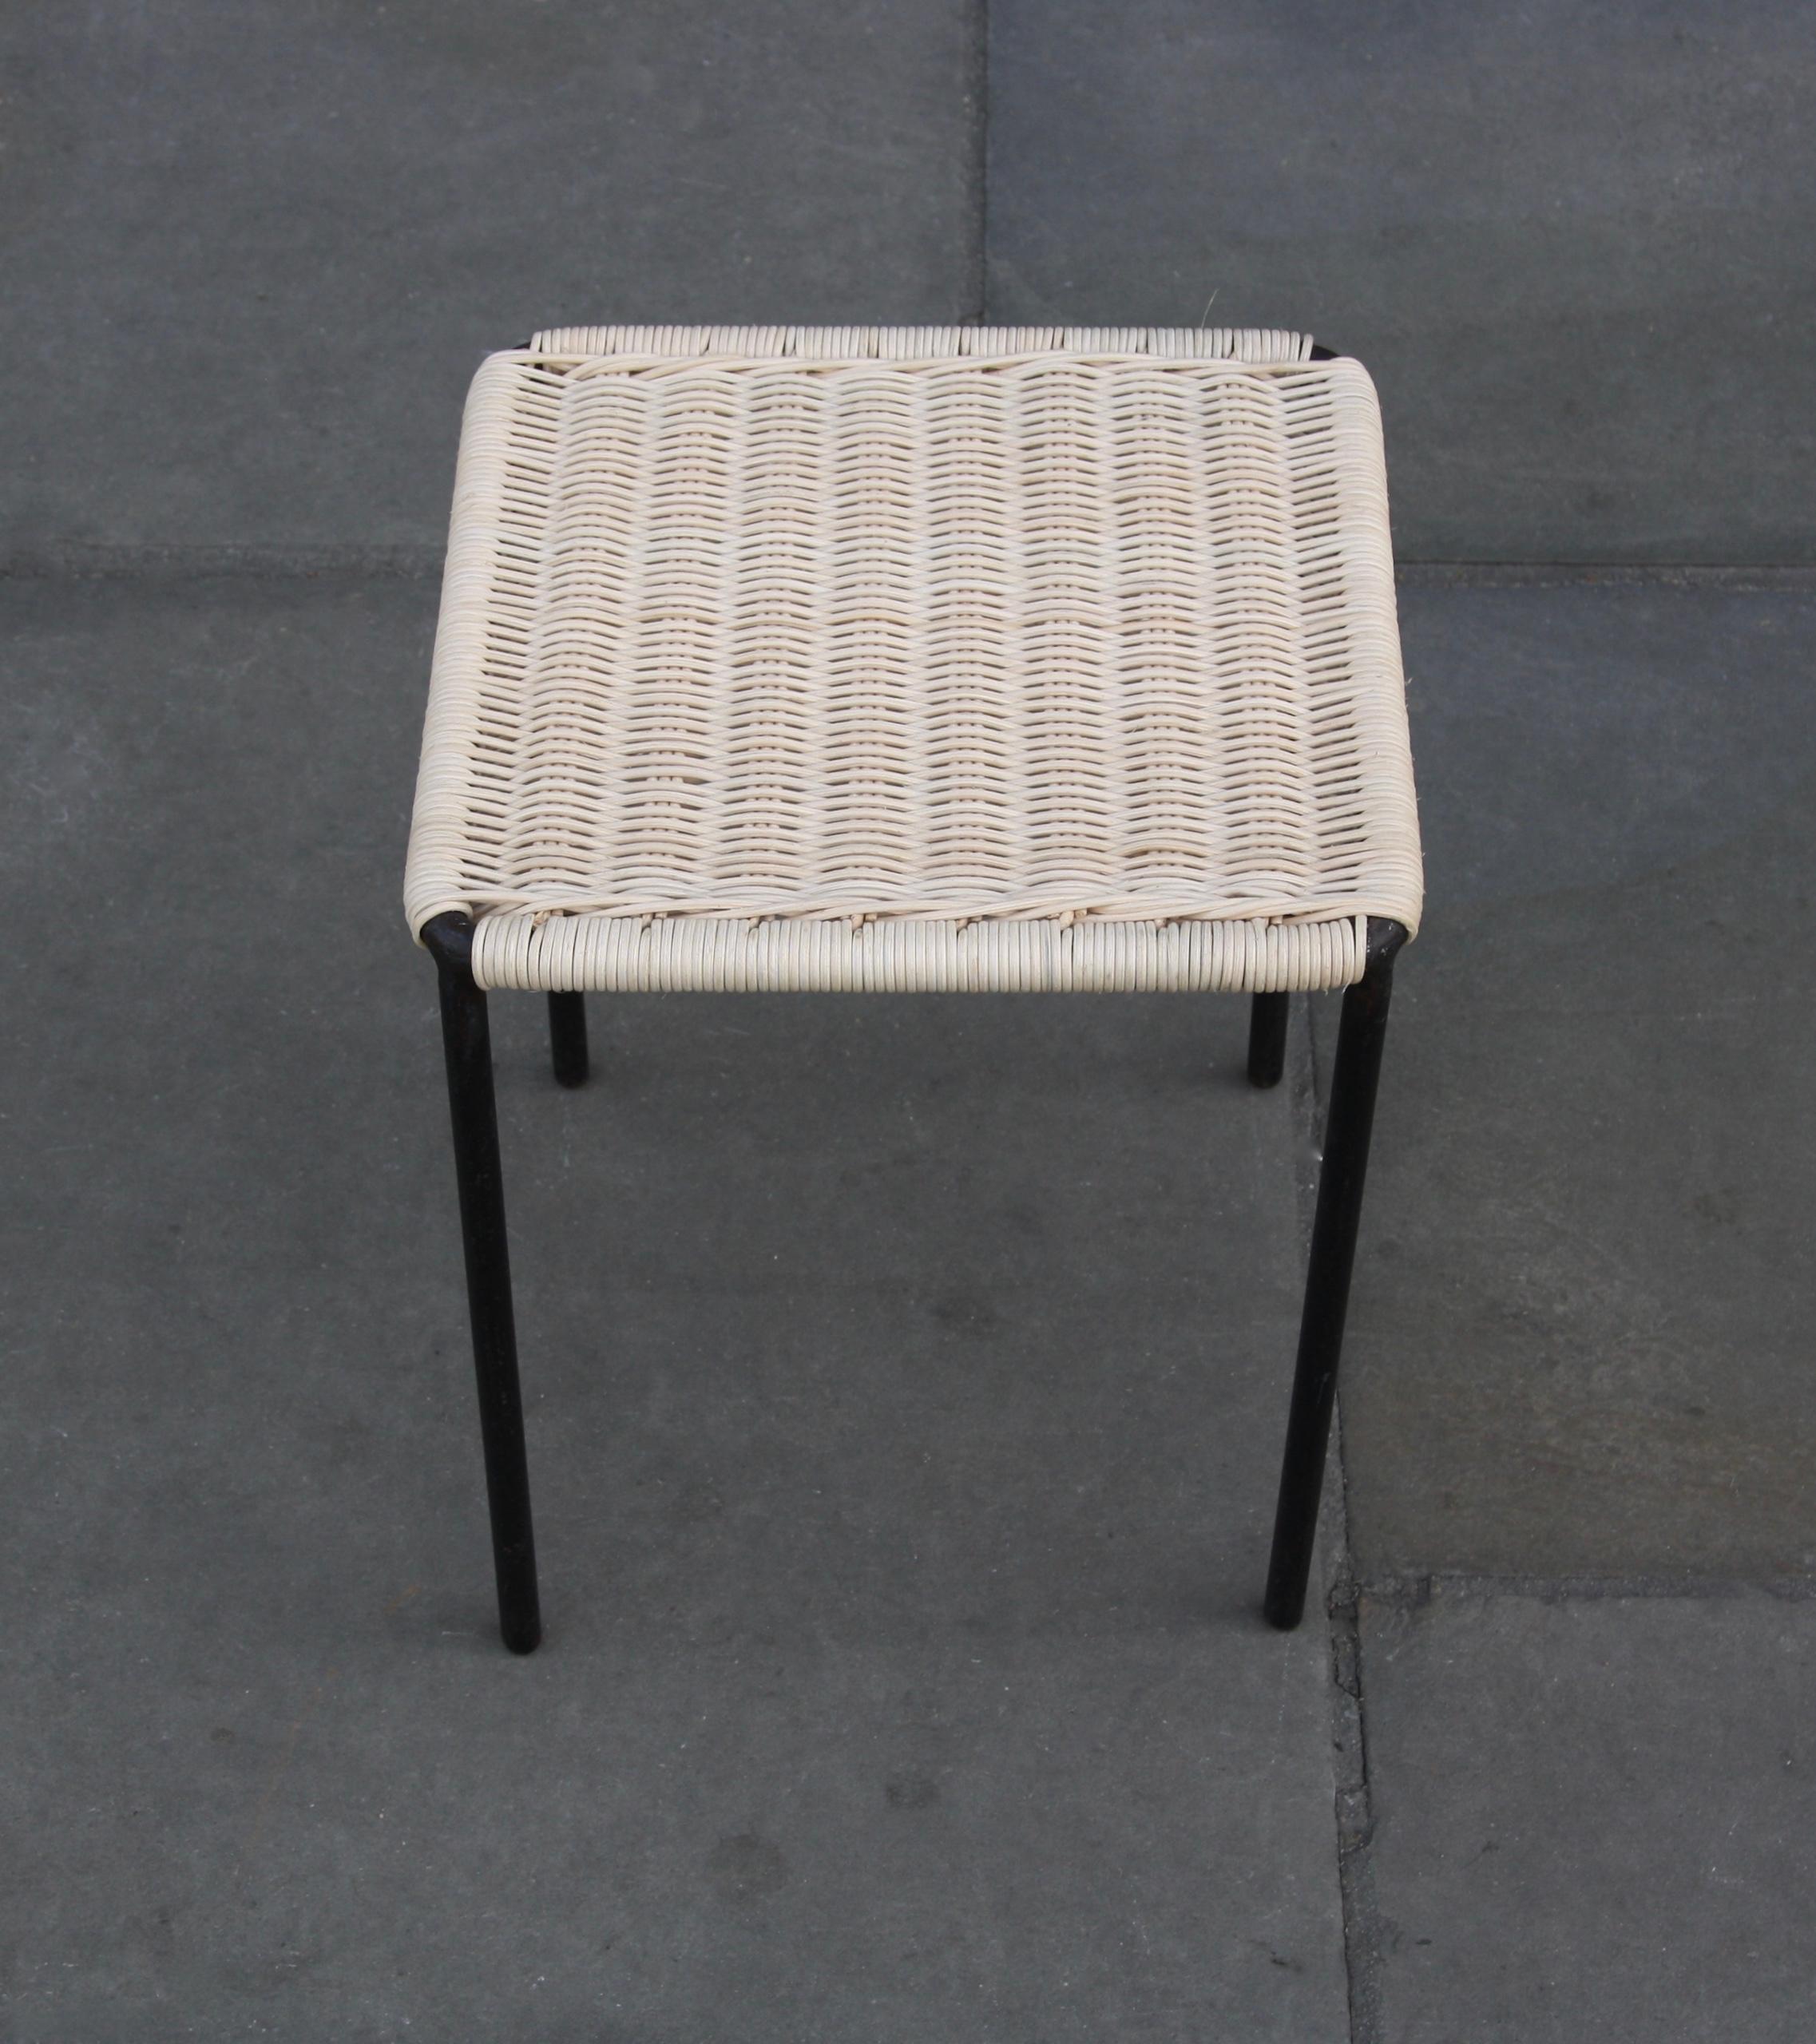 Carl Auböck II Vintage Woven Wicker Small Square Sized Table, circa 1950 For Sale 2